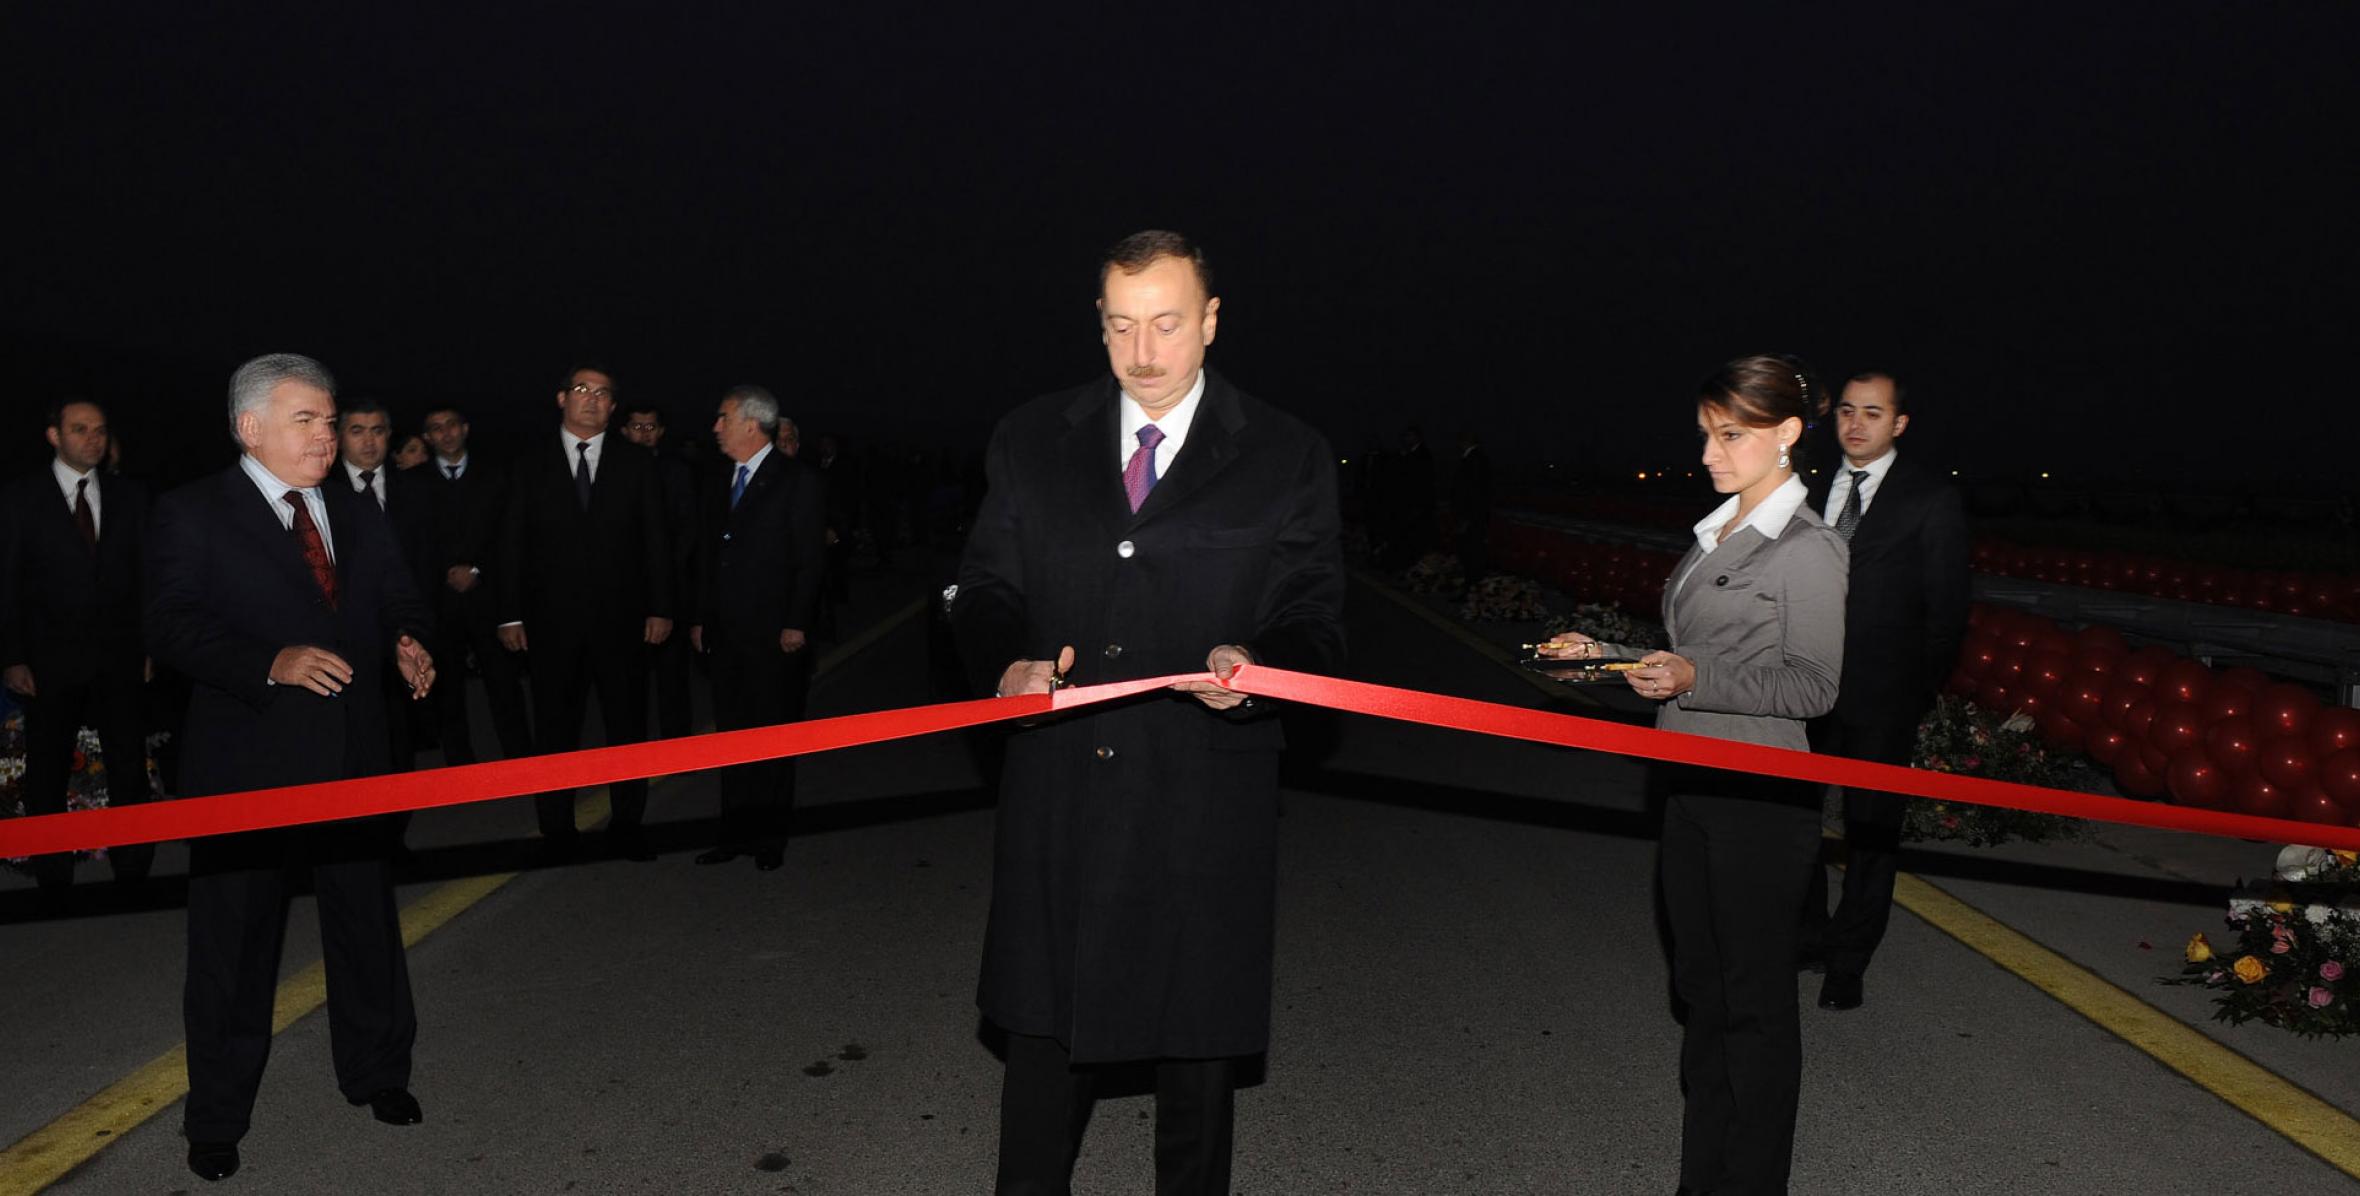 Ilham Aliyev attended the opening of a new circular road and two road junctions on the 9th kilometer of the Alat-Astara highway